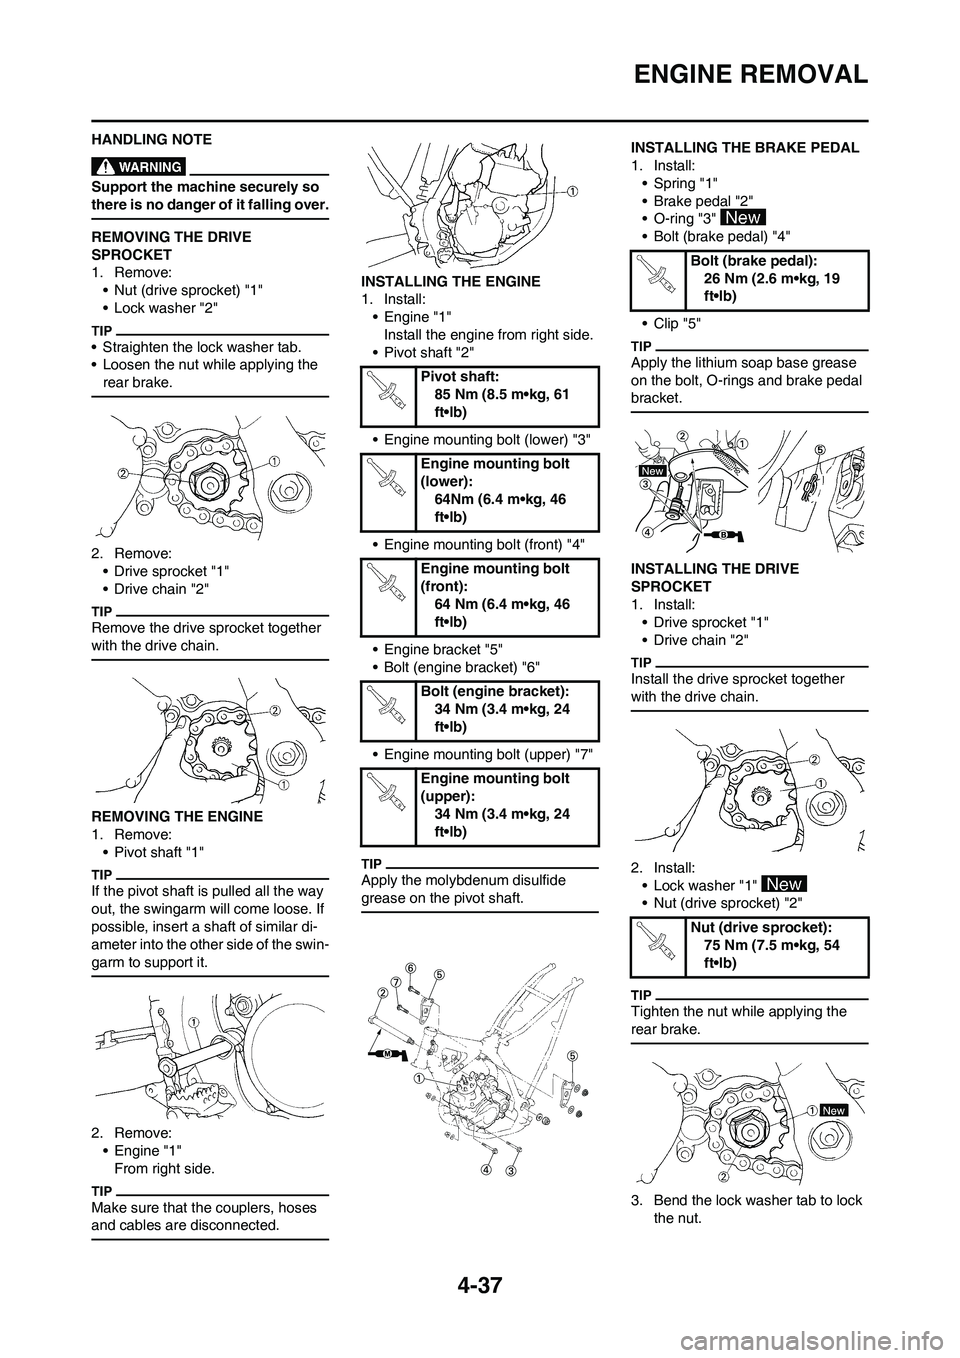 YAMAHA YZ125LC 2010 Owners Guide 4-37
ENGINE REMOVAL
HANDLING NOTE
Support the machine securely so 
there is no danger of it falling over.
REMOVING THE DRIVE 
SPROCKET
1. Remove:
• Nut (drive sprocket) "1"
• Lock washer "2"
• S